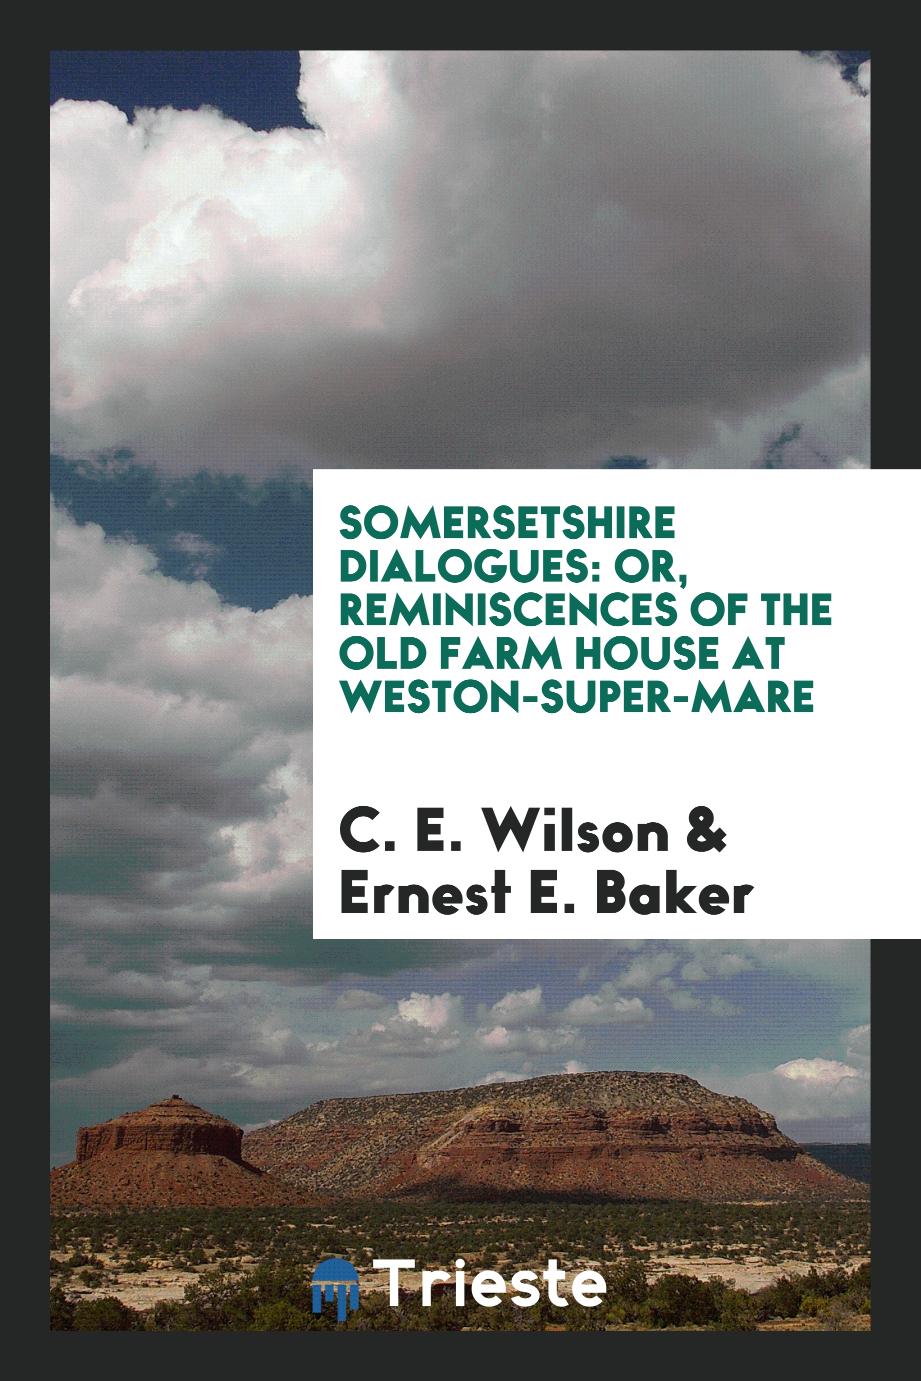 Somersetshire Dialogues: Or, Reminiscences of the Old Farm House at Weston-super-Mare